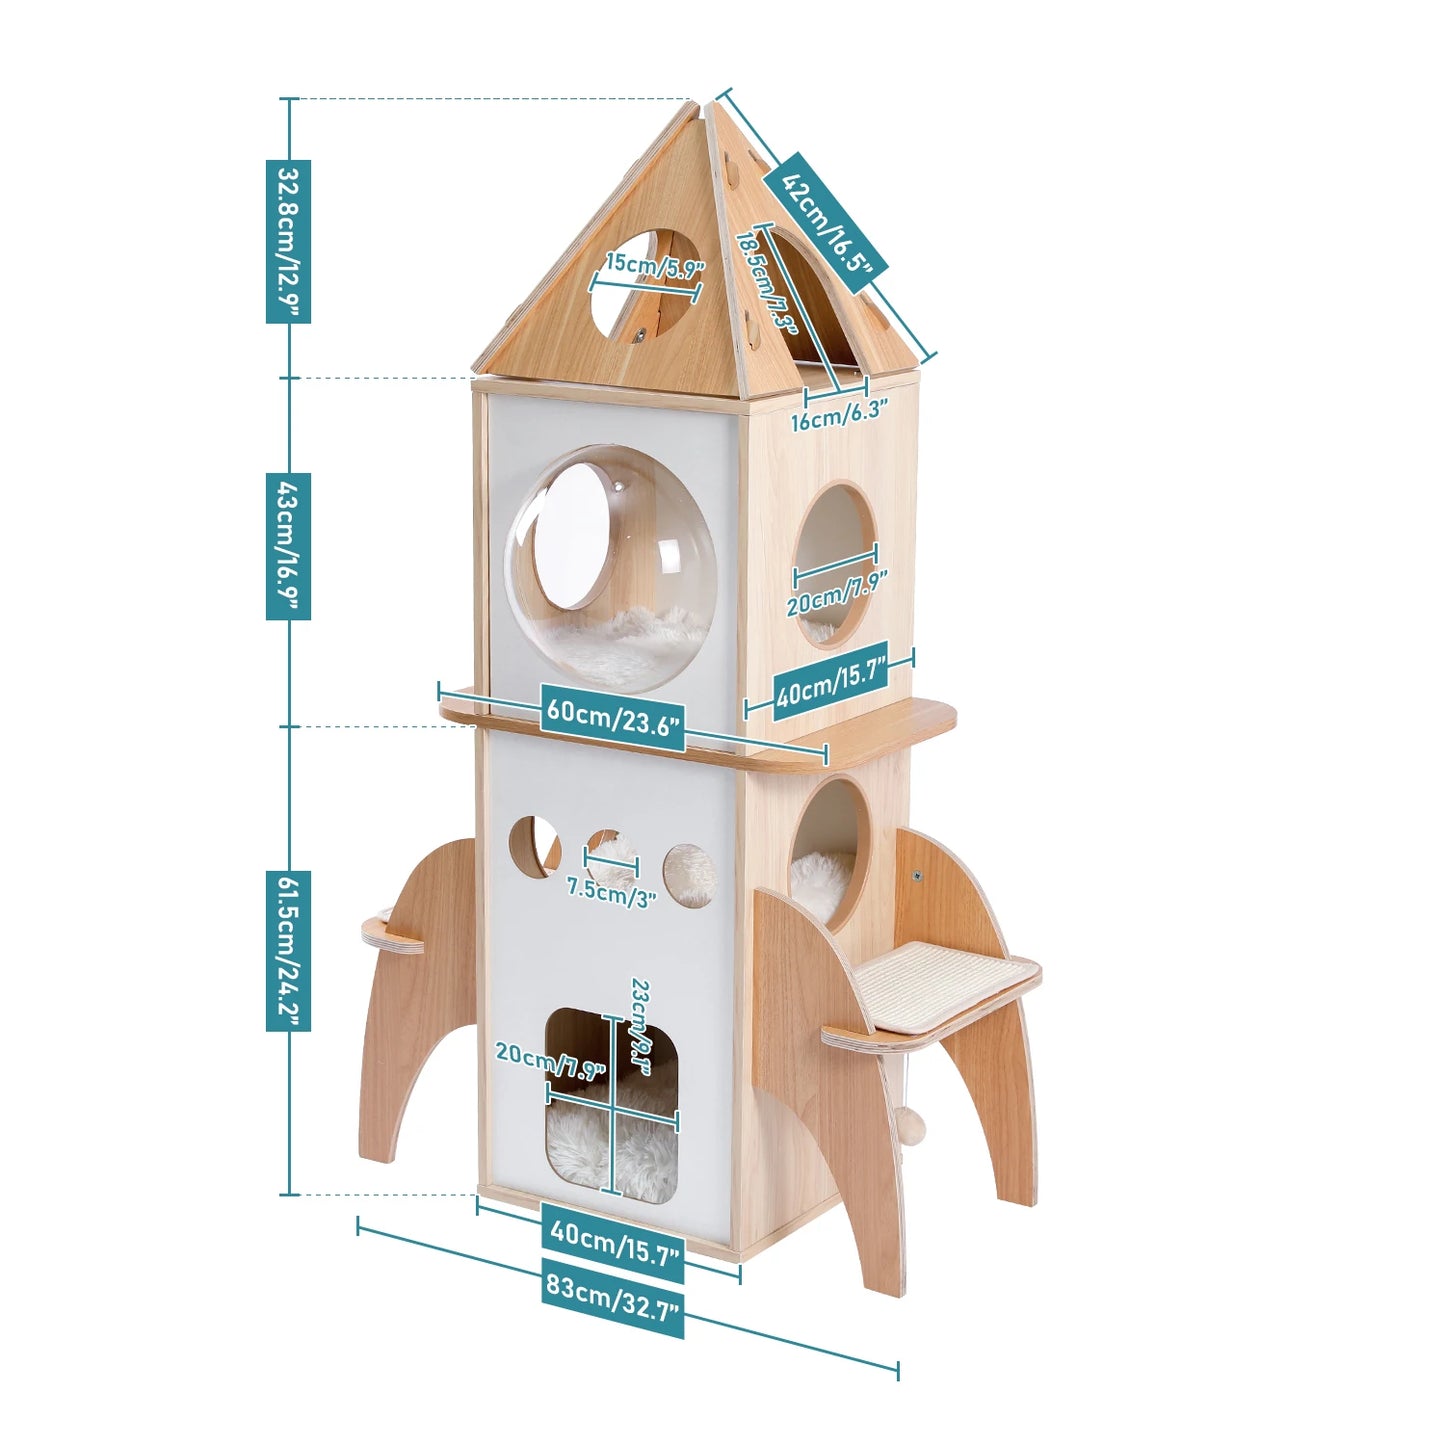 137cm Wooden Rocket Cat Tree with Sisal Scratching Posts and Cozy Condos